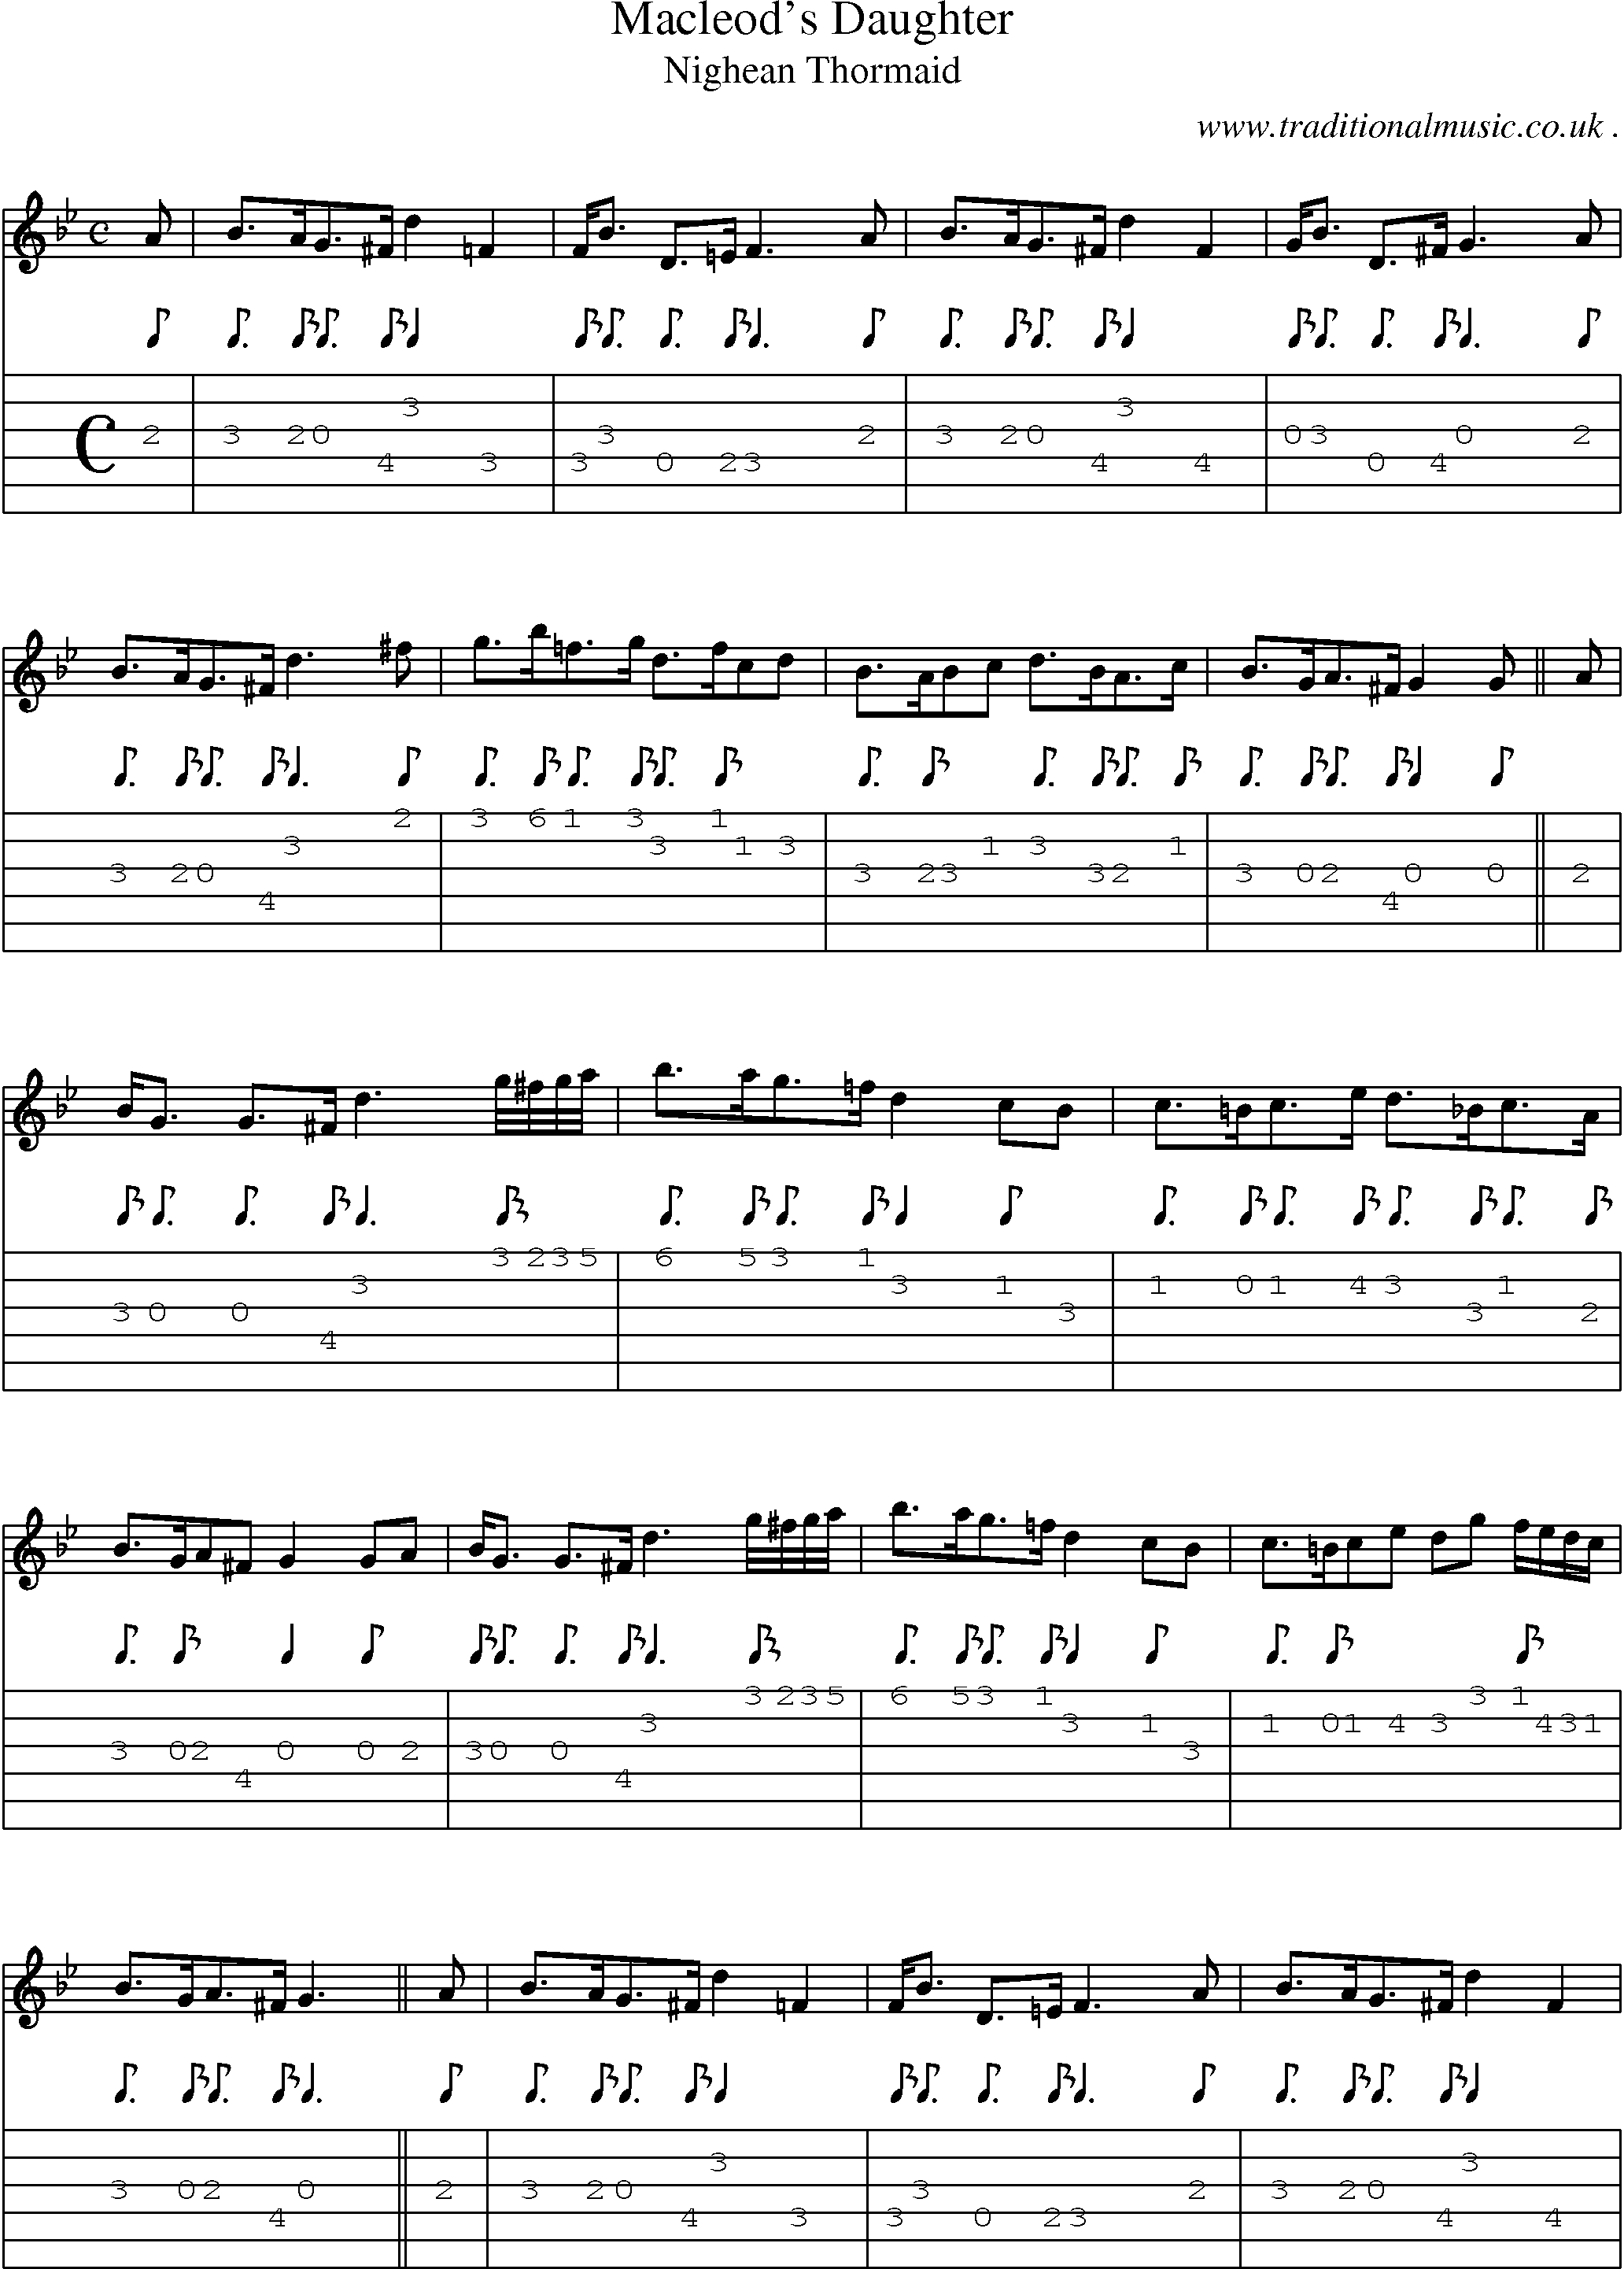 Sheet-music  score, Chords and Guitar Tabs for Macleods Daughter